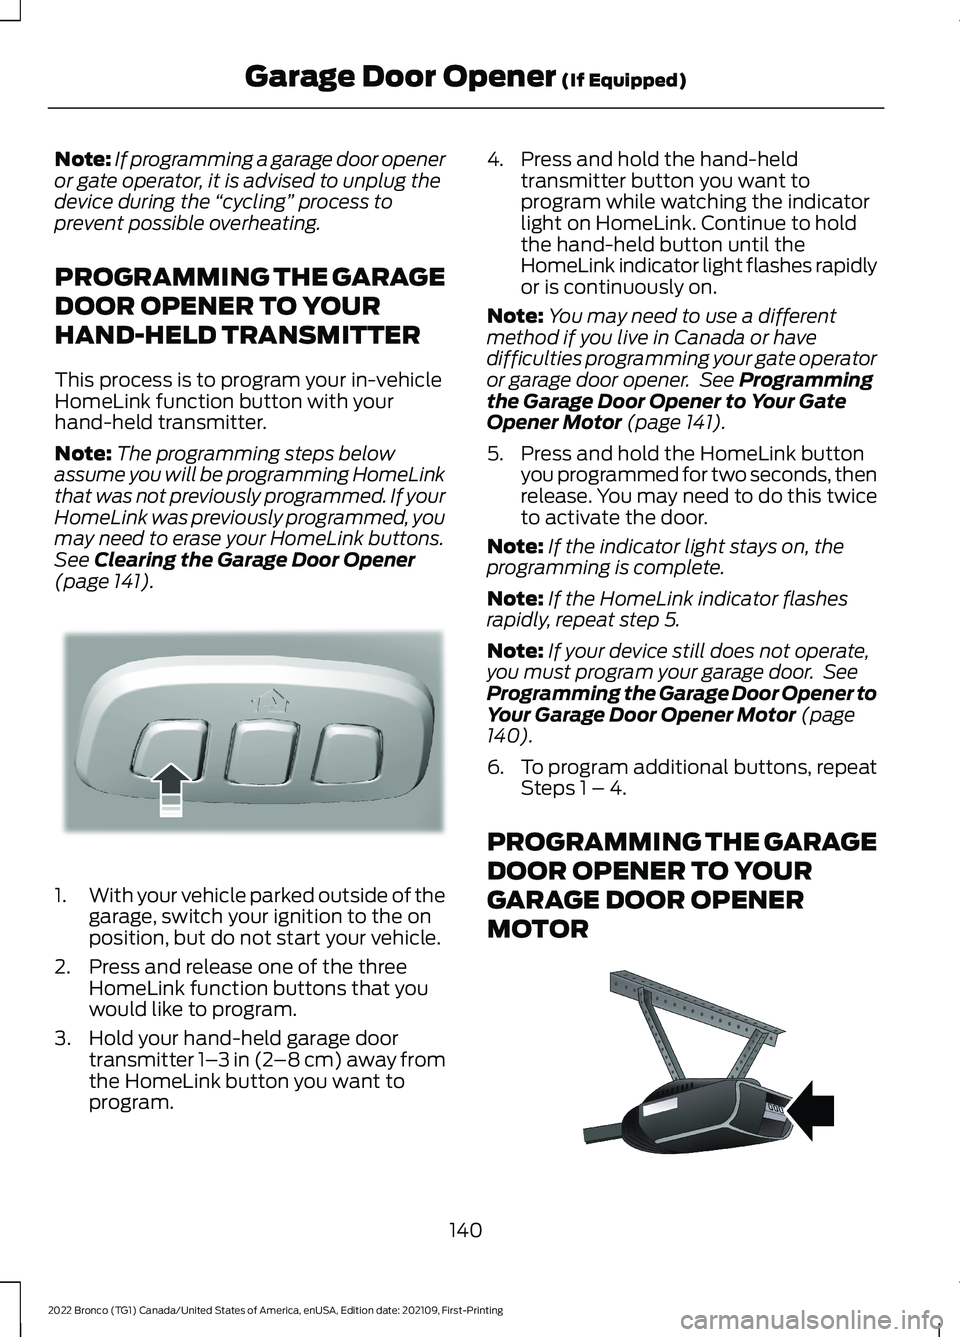 FORD BRONCO 2022  Owners Manual Note:If programming a garage door openeror gate operator, it is advised to unplug thedevice during the “cycling” process toprevent possible overheating.
PROGRAMMING THE GARAGE
DOOR OPENER TO YOUR
